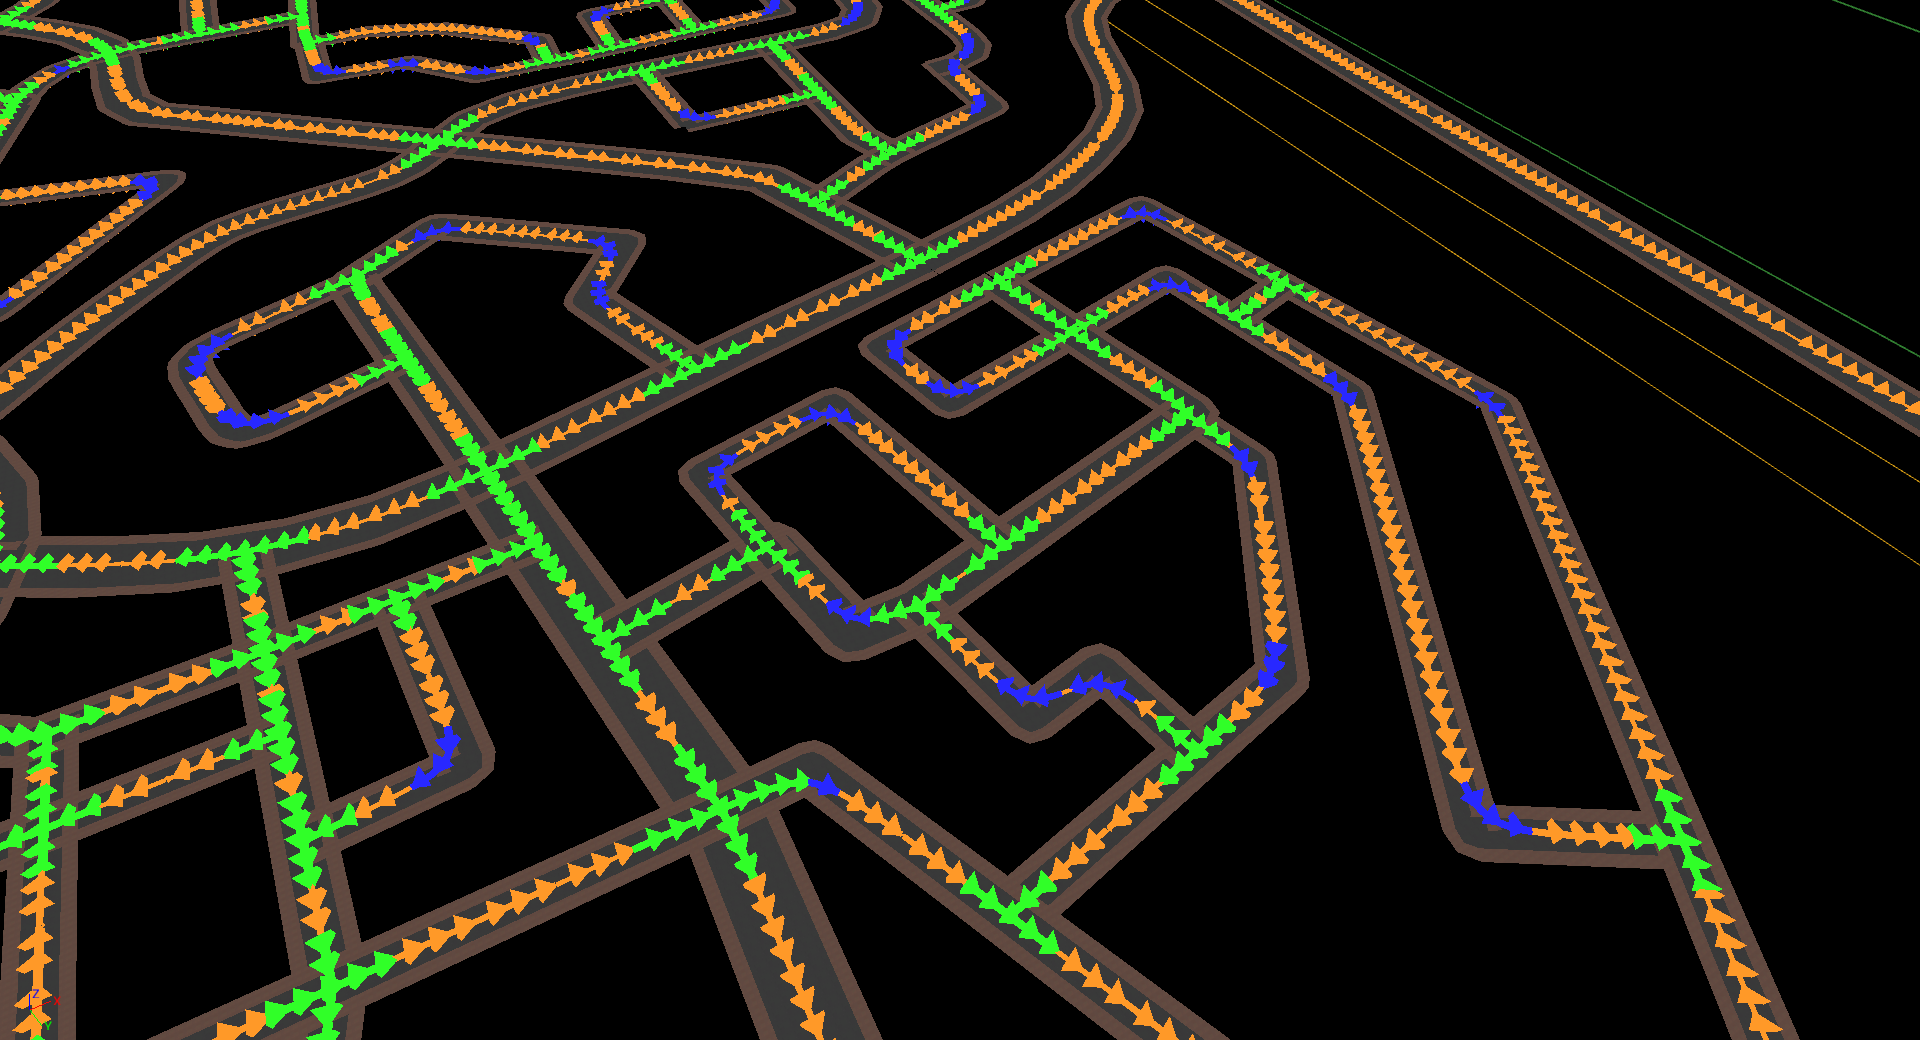 The road network preview shows color codes for intersections and sharp turns that help to check if the input splines are valid